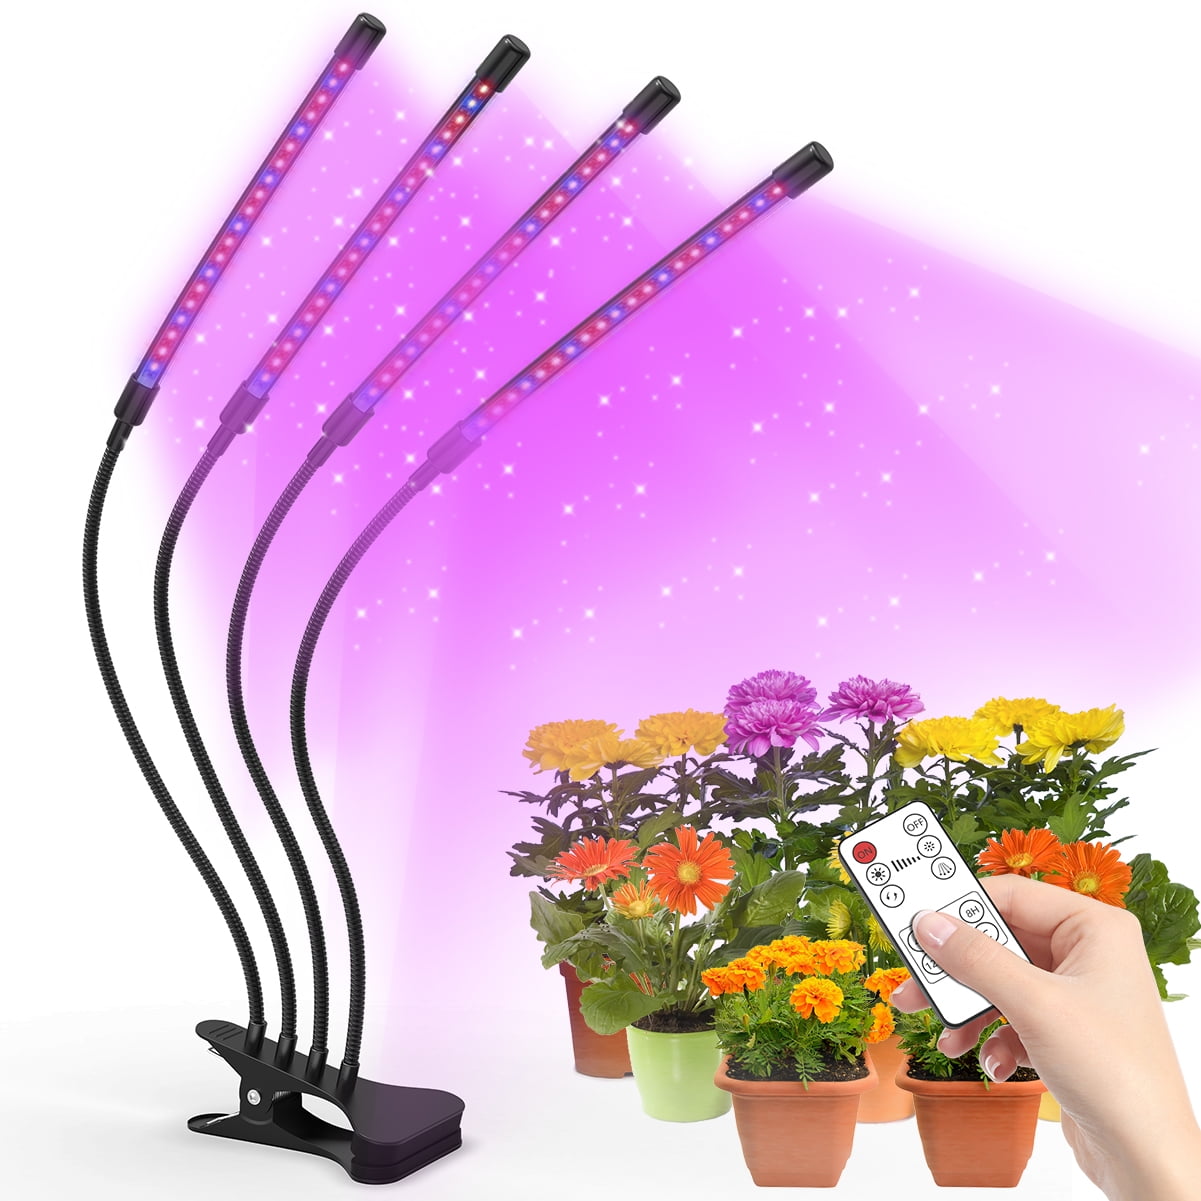 NAILGIRLS LED Plant Grow Light Full Spectrum, 1000W Dual Switch Veg/Bloom  Daisy Chain Plant Grow Heat Lamp with Temperature Hygrometer for Indoor